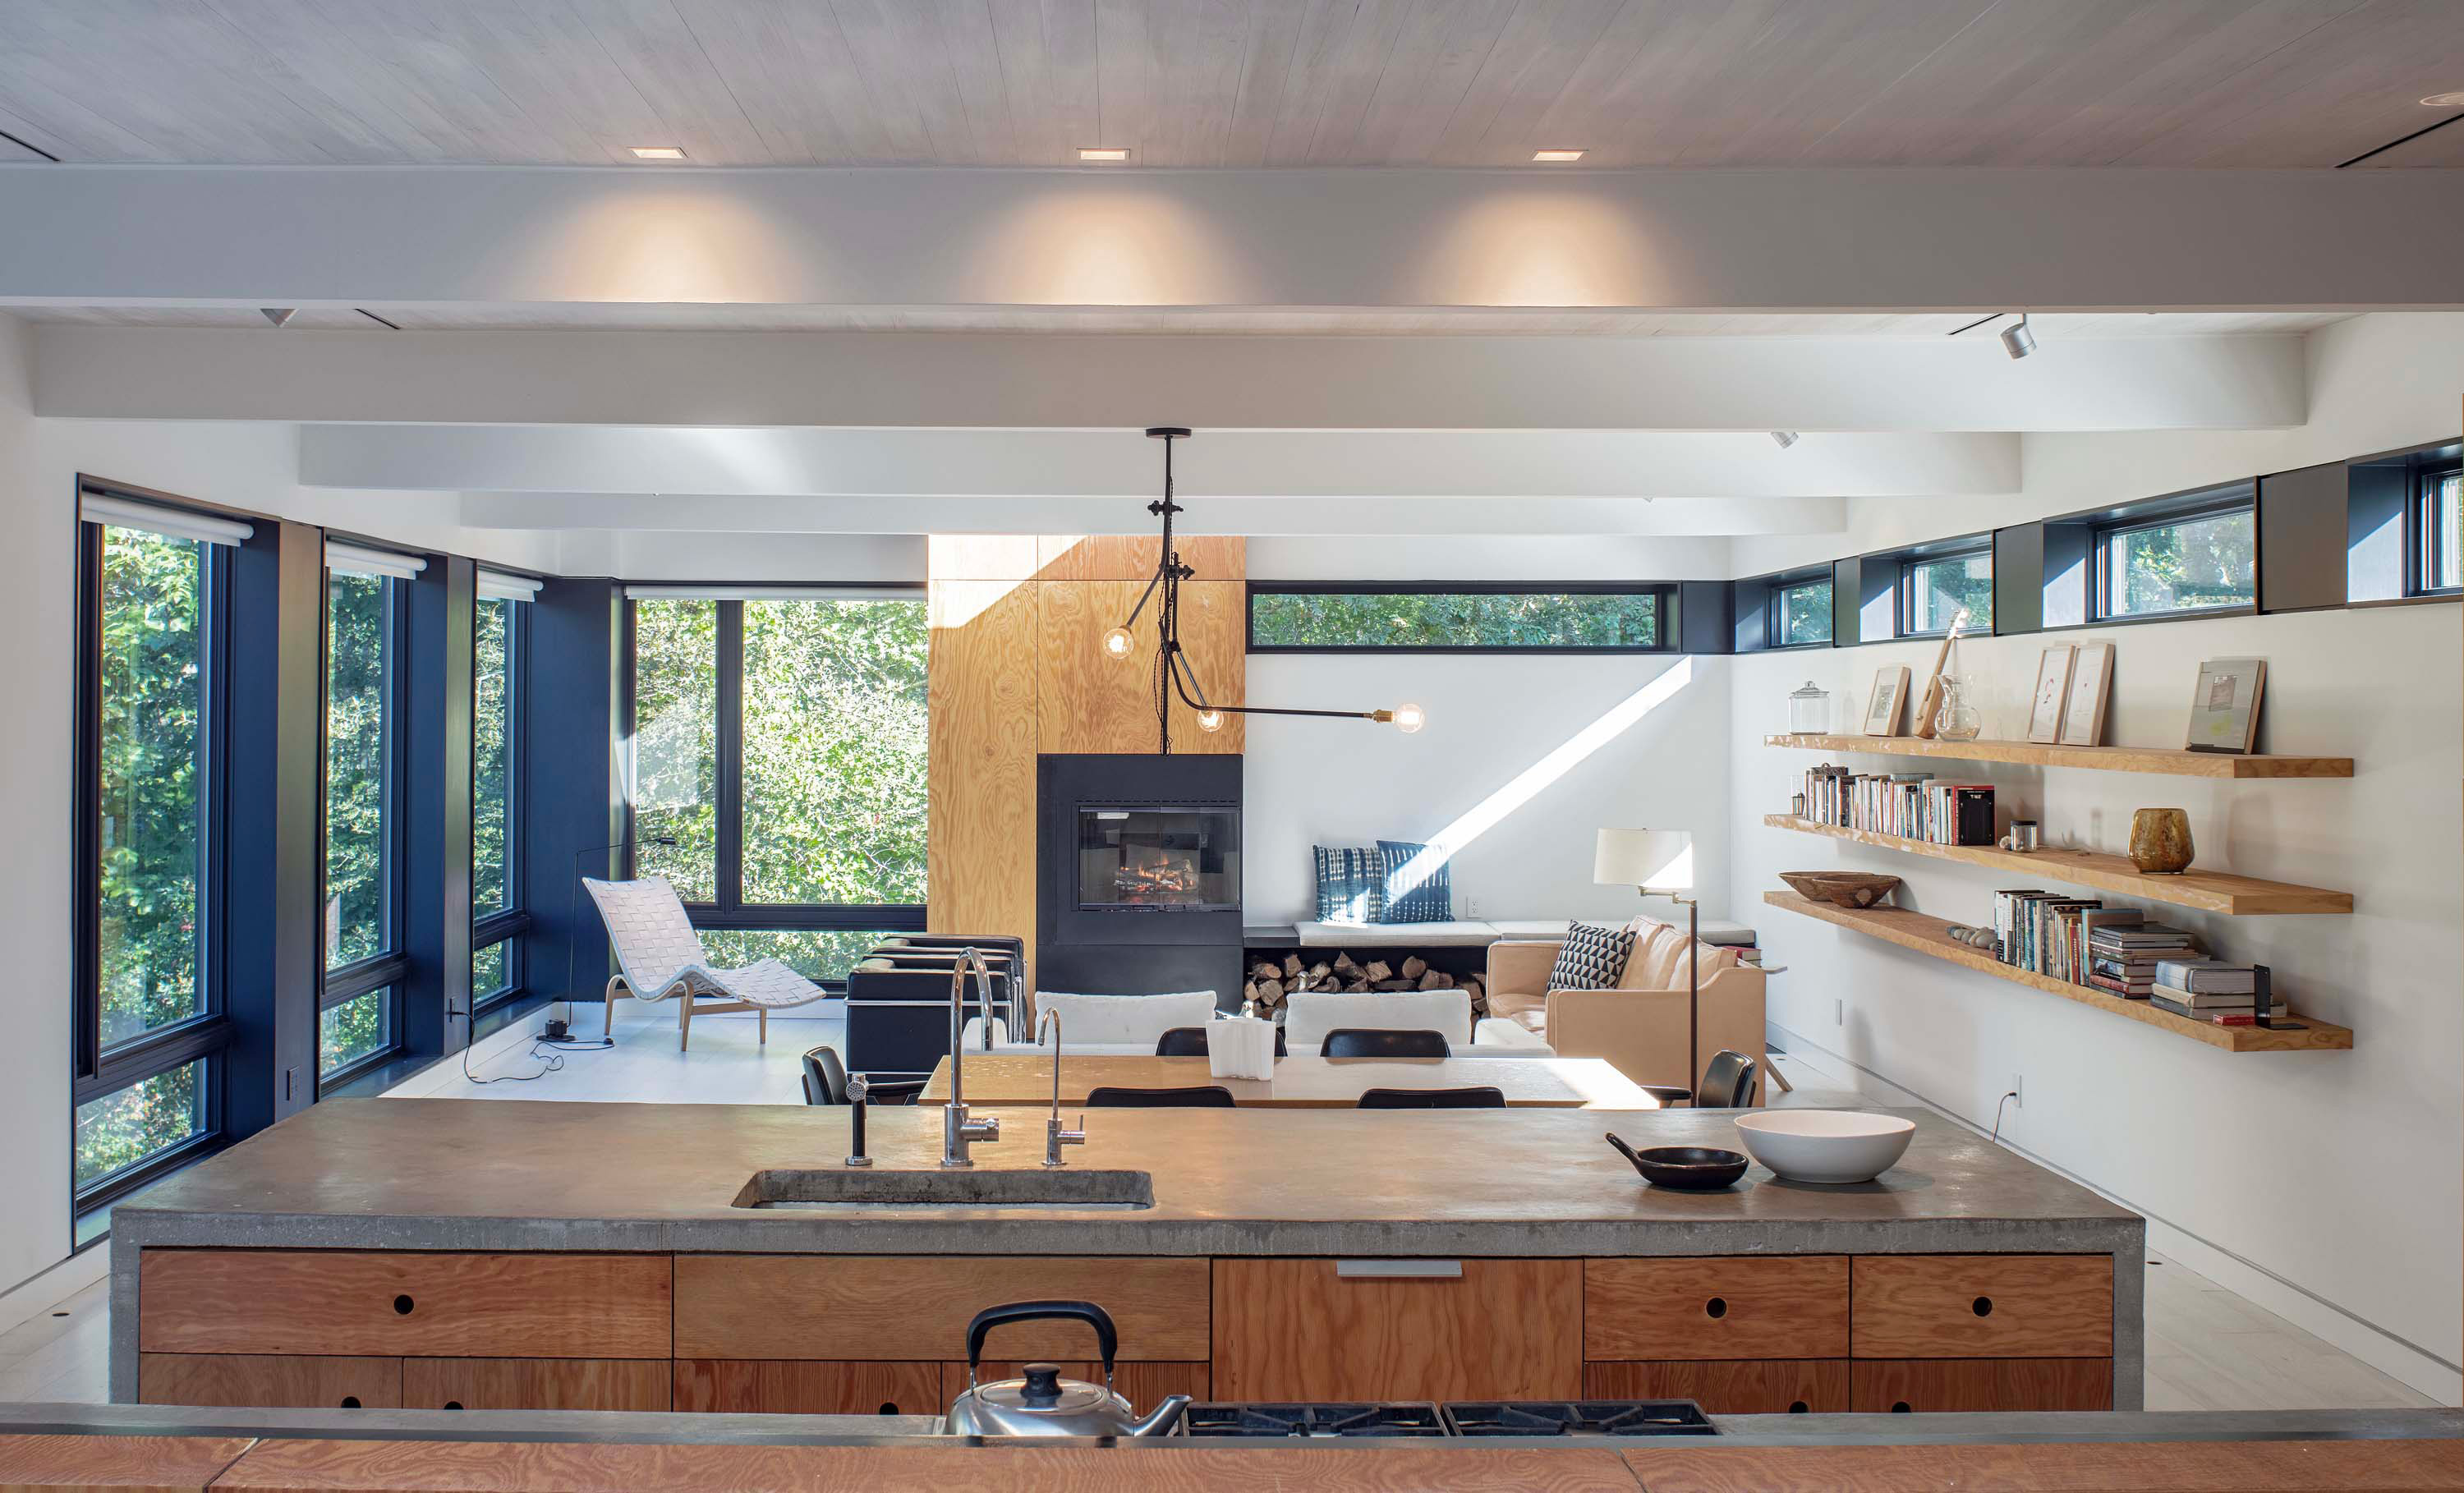 Kitchen shot facing living room by Taggart Sorensen, featuring the open, airy feeling of the Bridgehampton House by Specht Novak Architects.